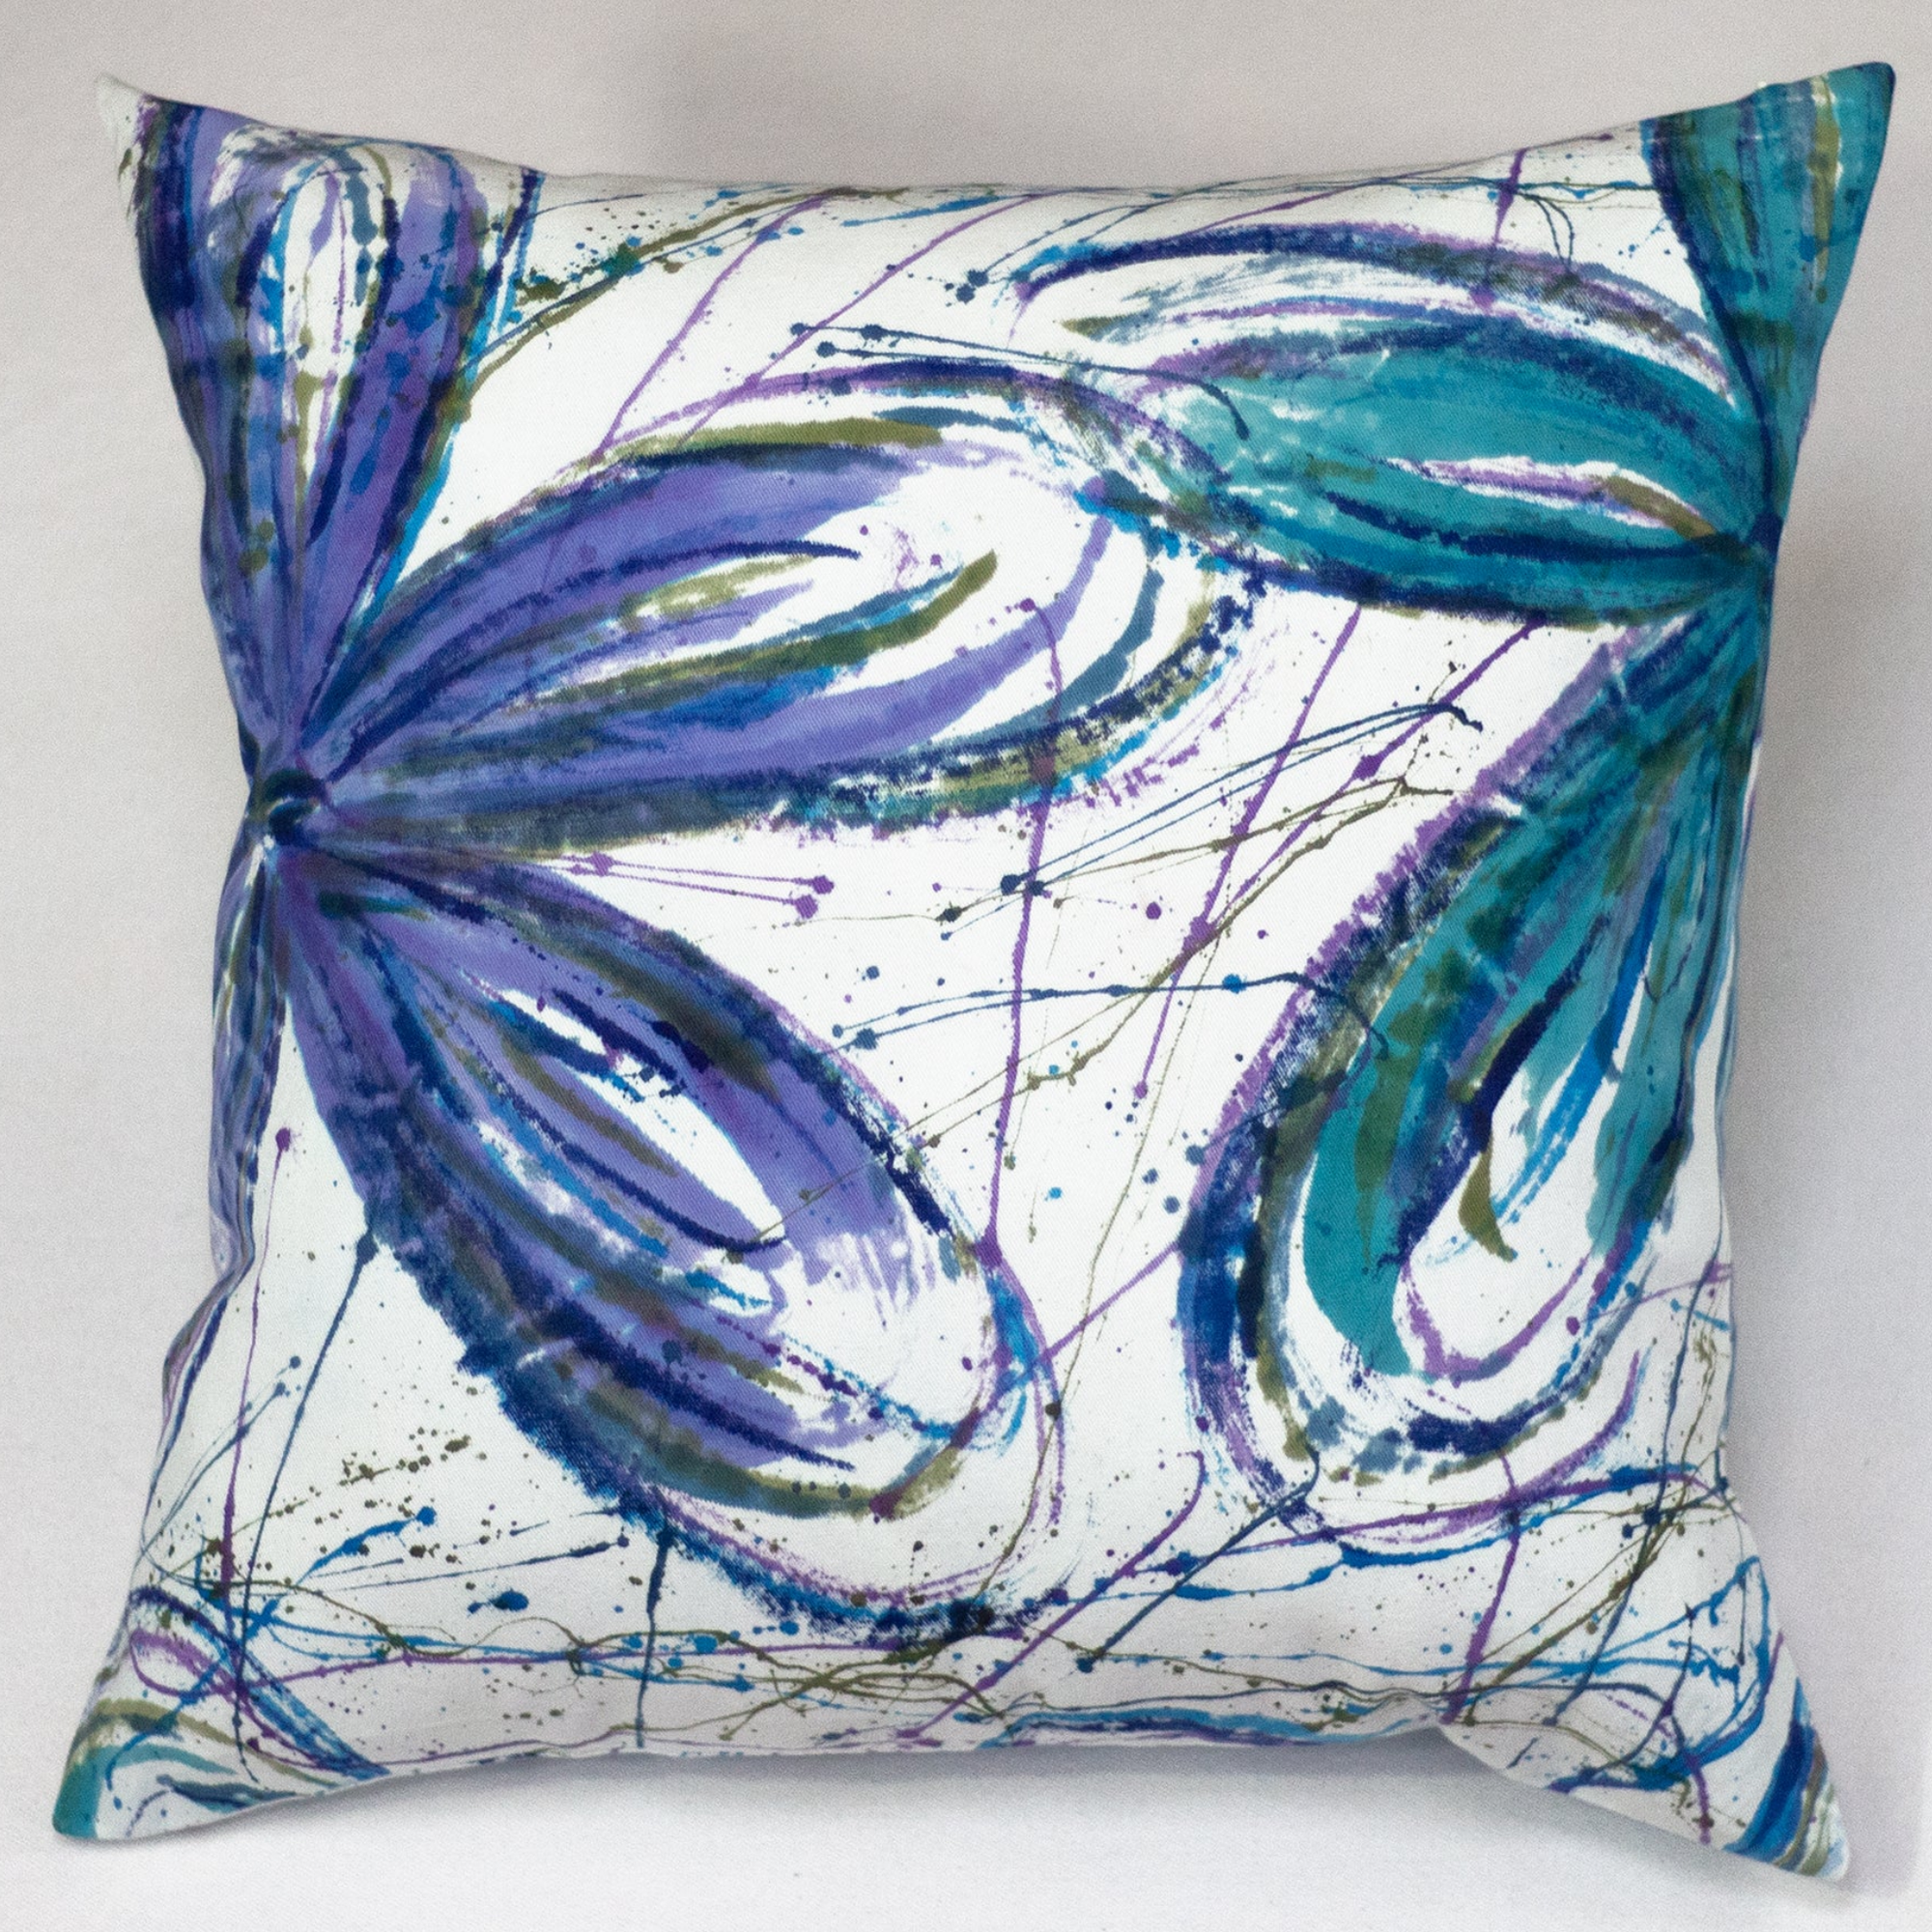 Hand Painted Accent Pillow Cover - Flower Power Blues